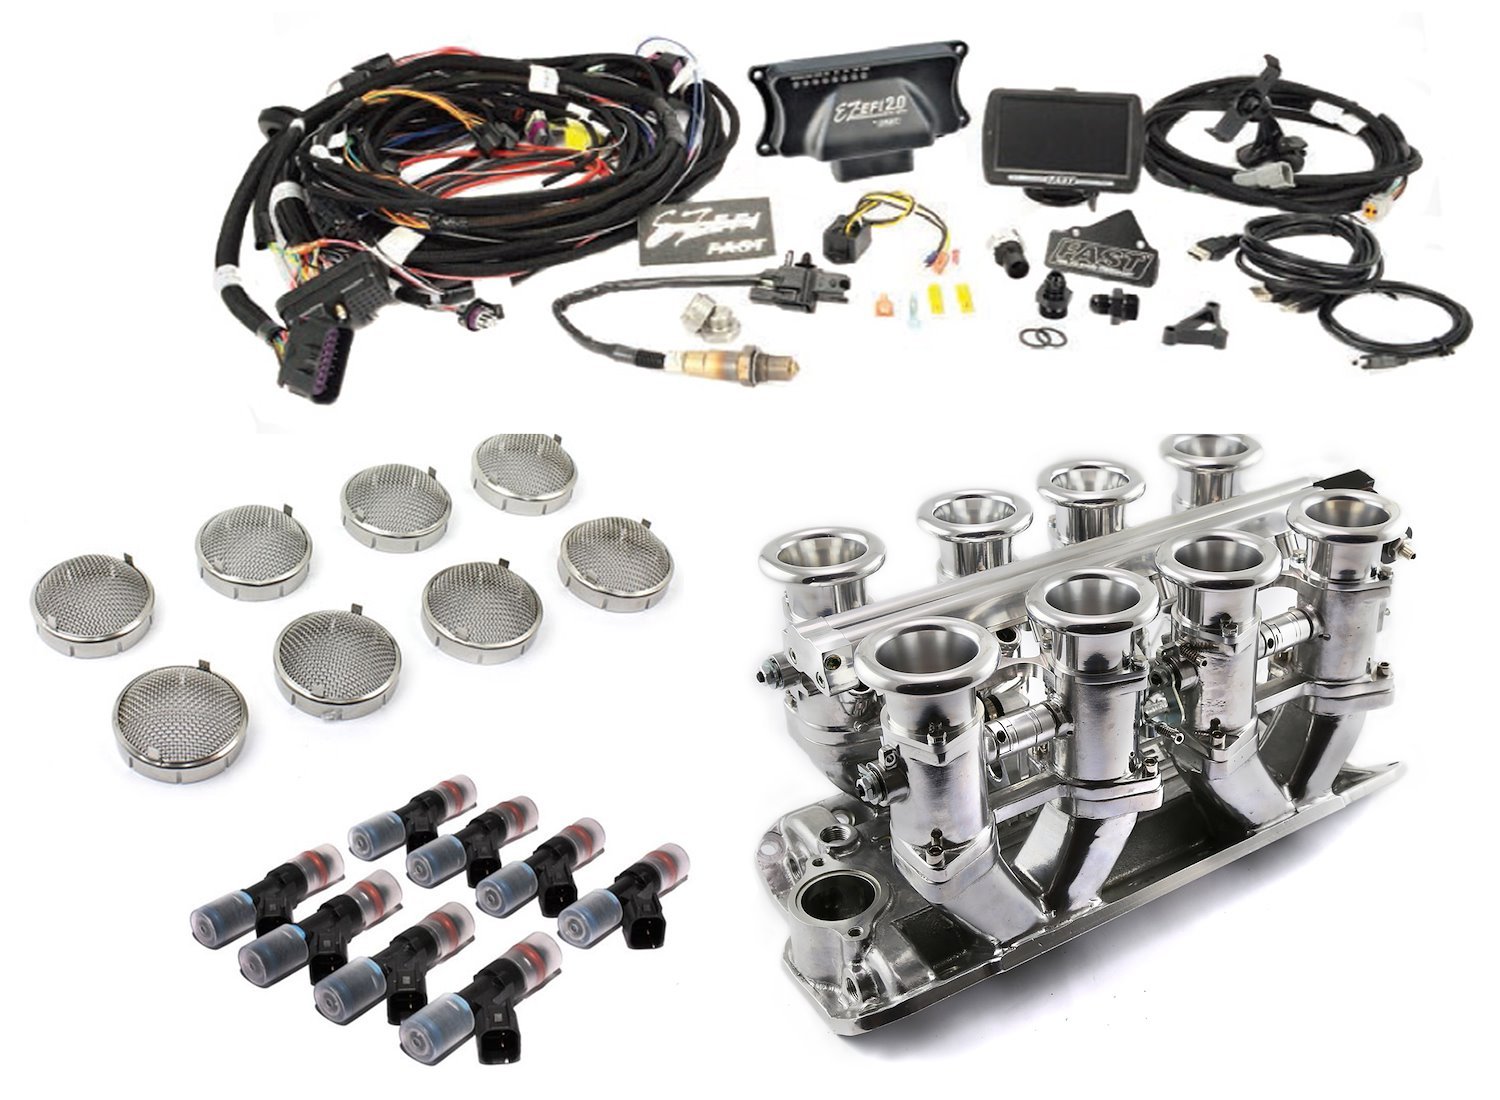 Downdraft EFI Stack Intake System Kit for Small